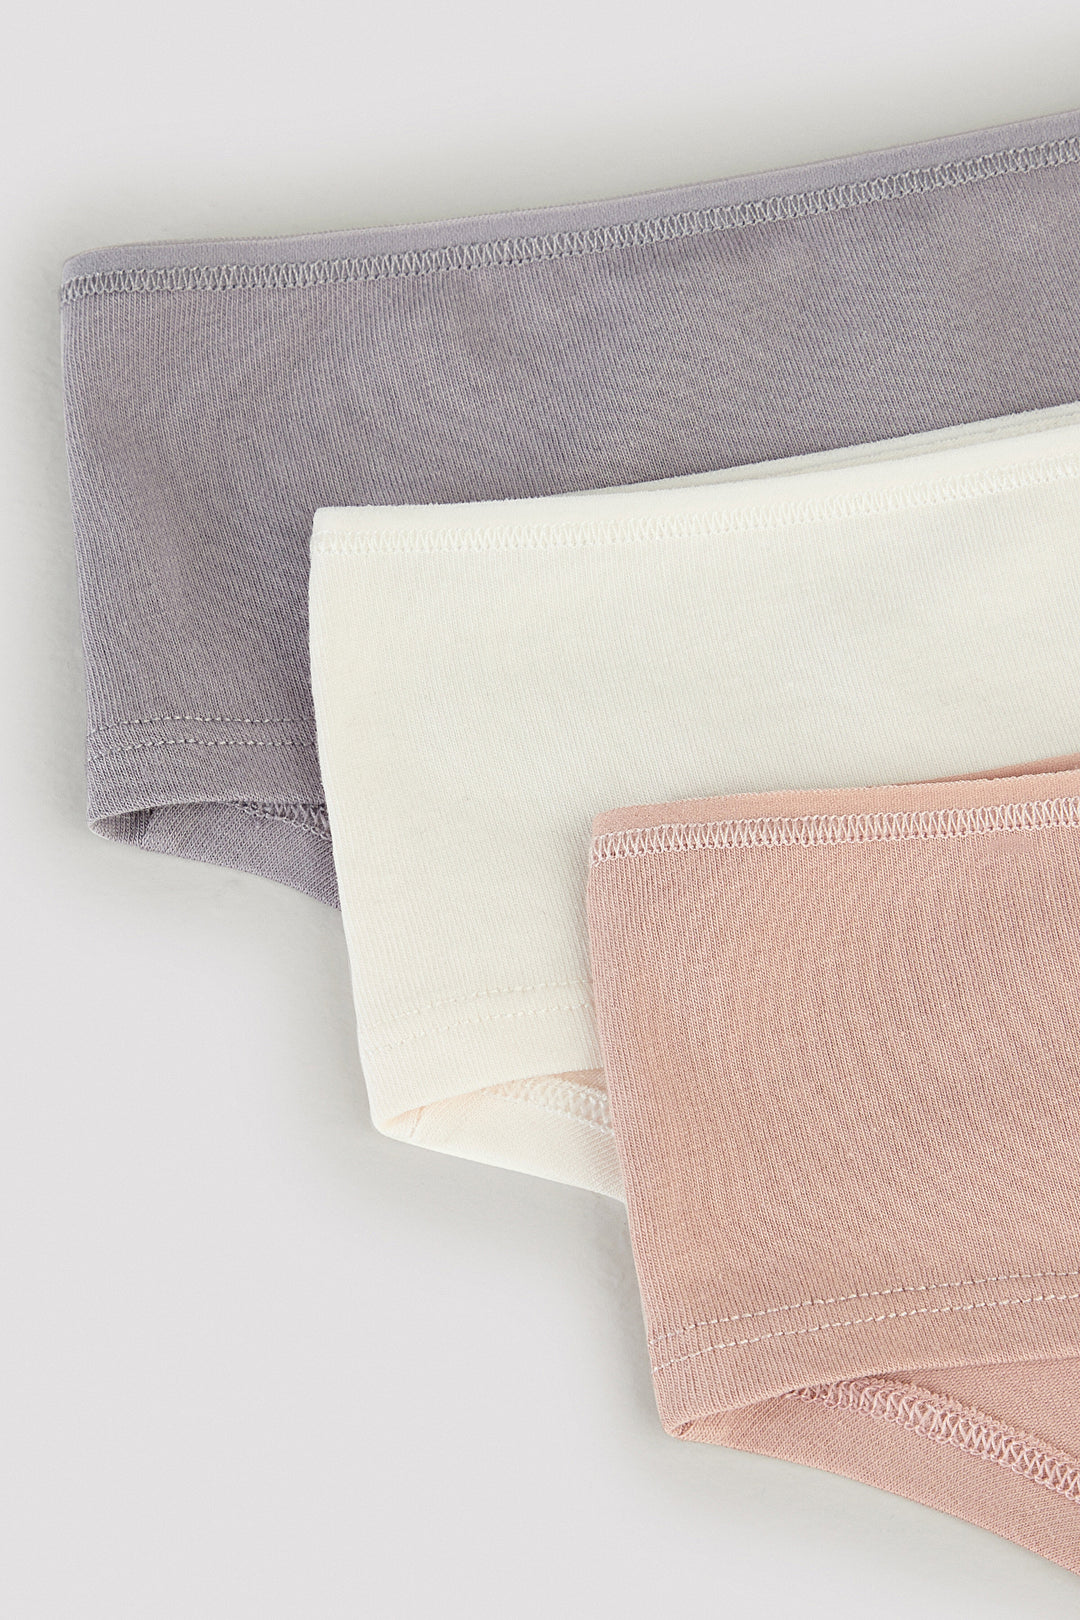 Soft Colour 3 Pack Hipster